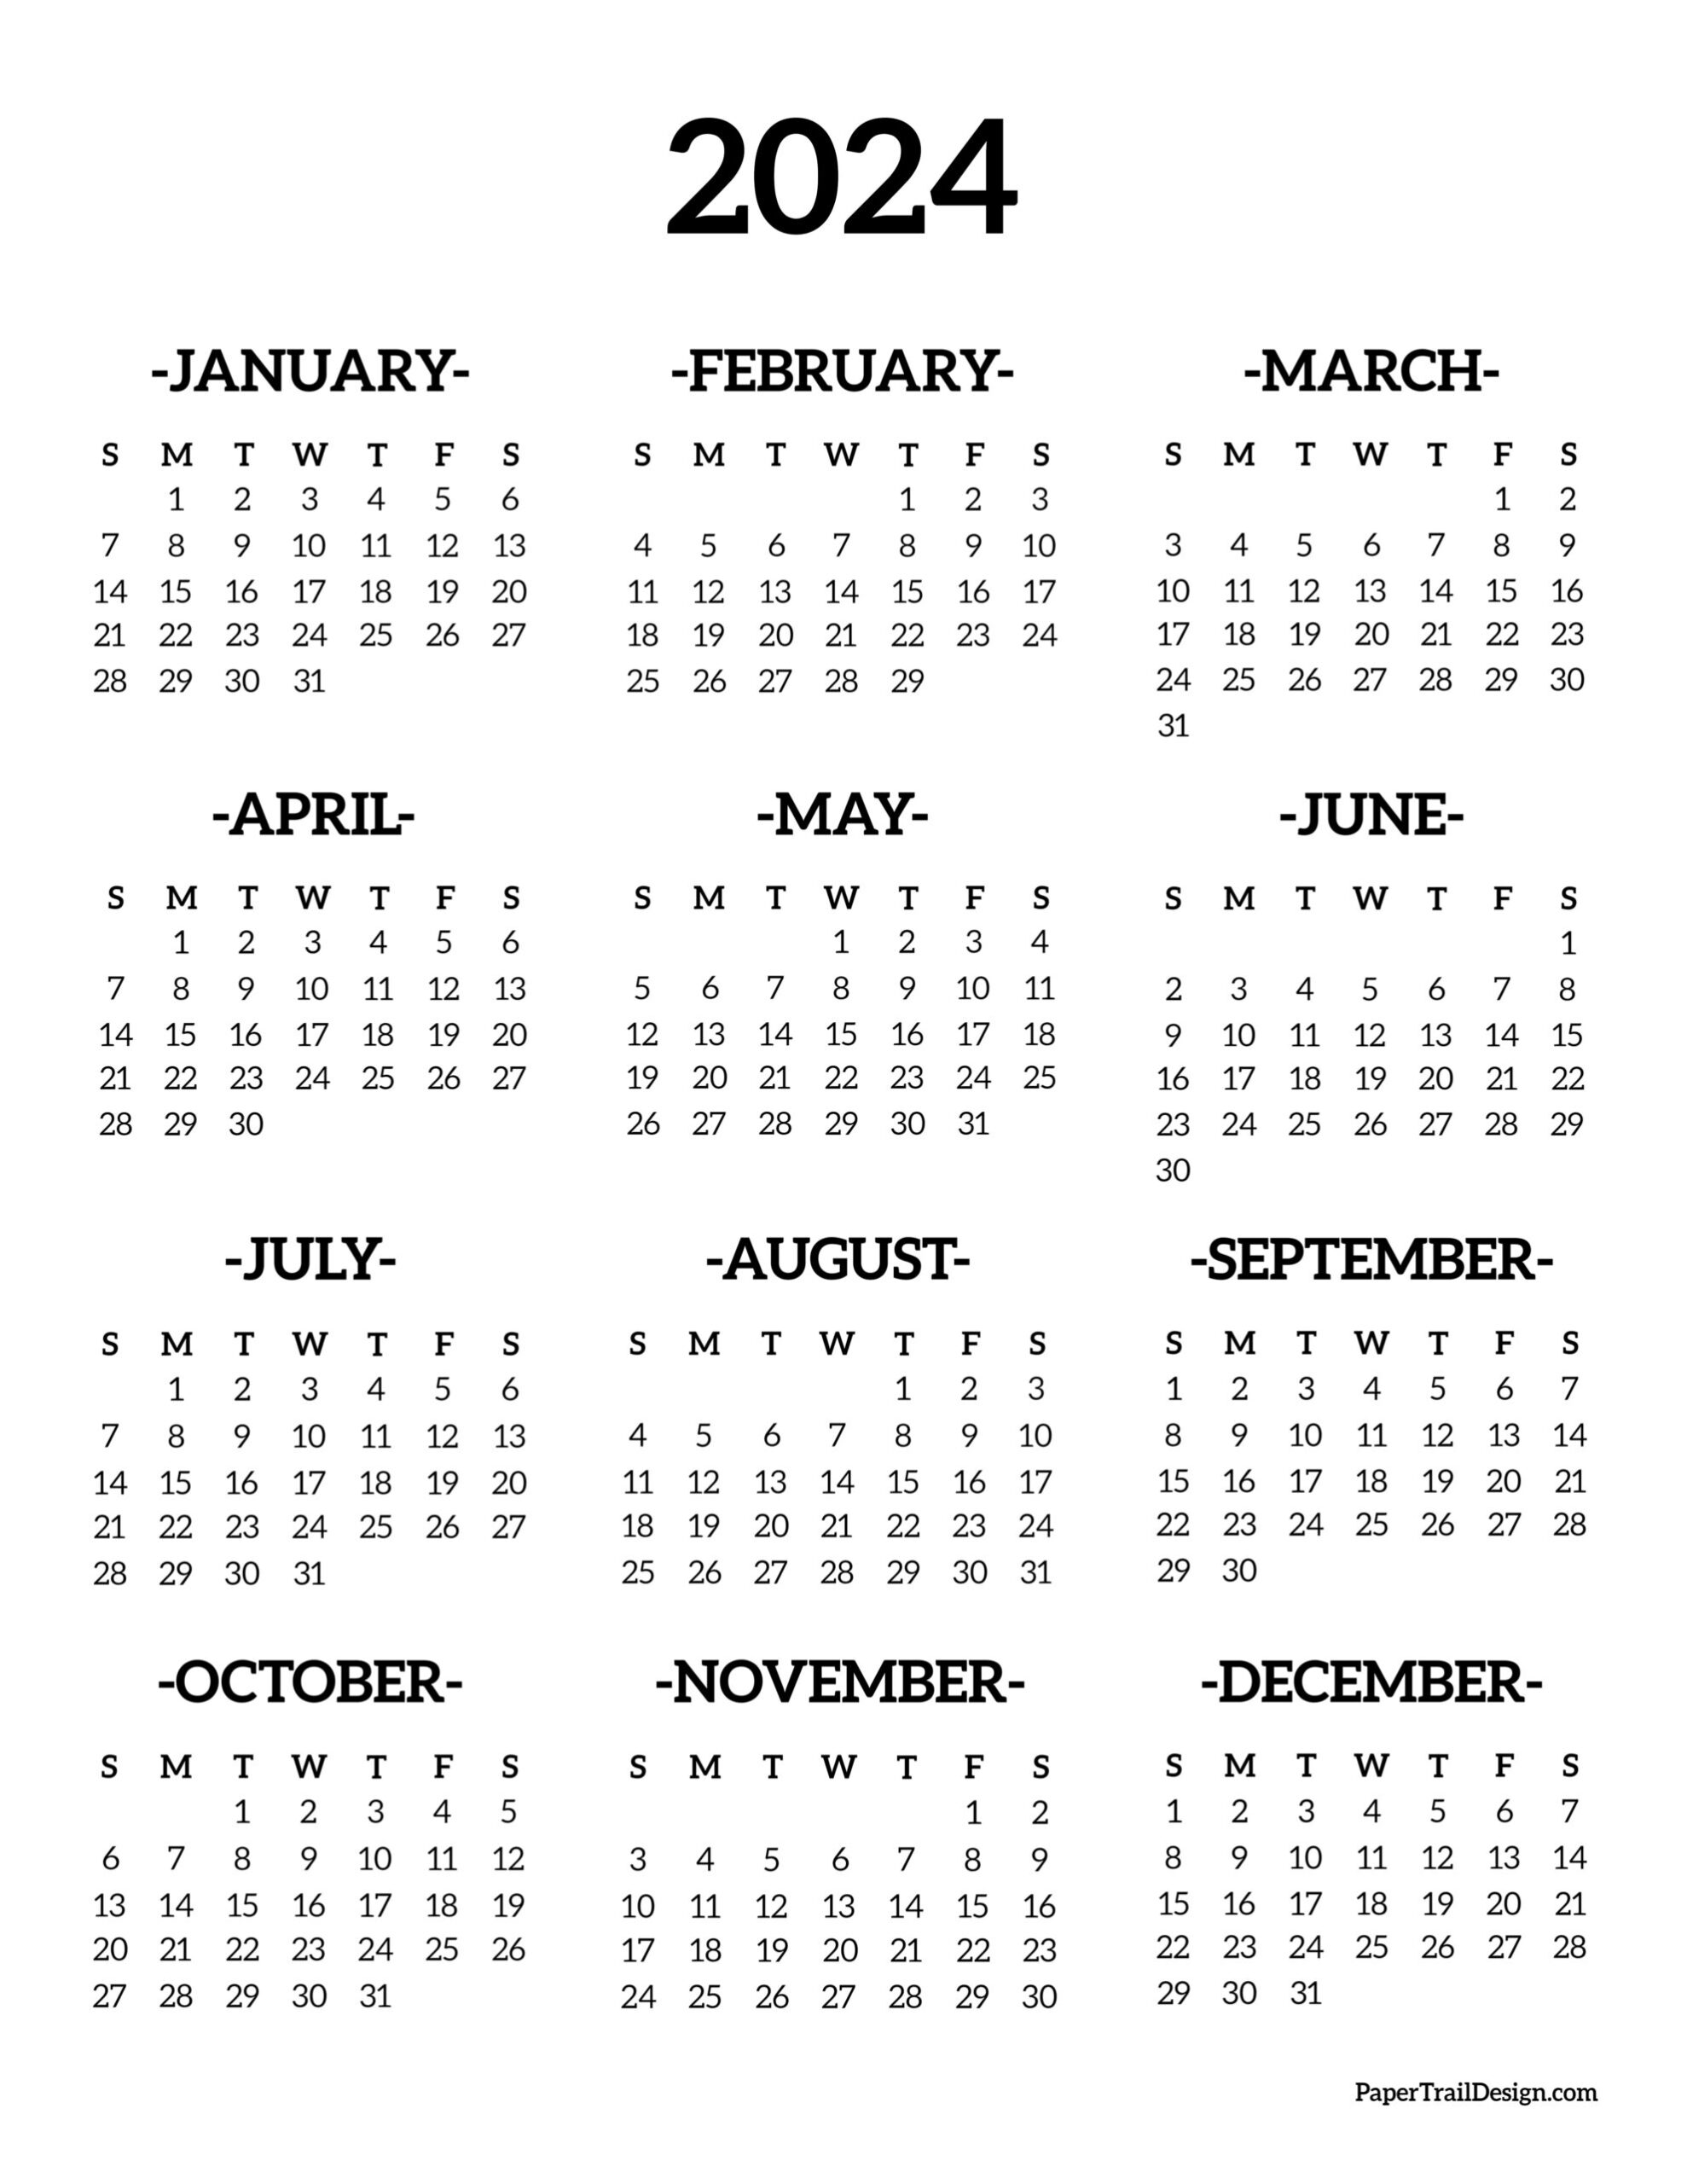 Calendar 2024 Printable One Page - Paper Trail Design for 2024 Free Printable Calendar One Page